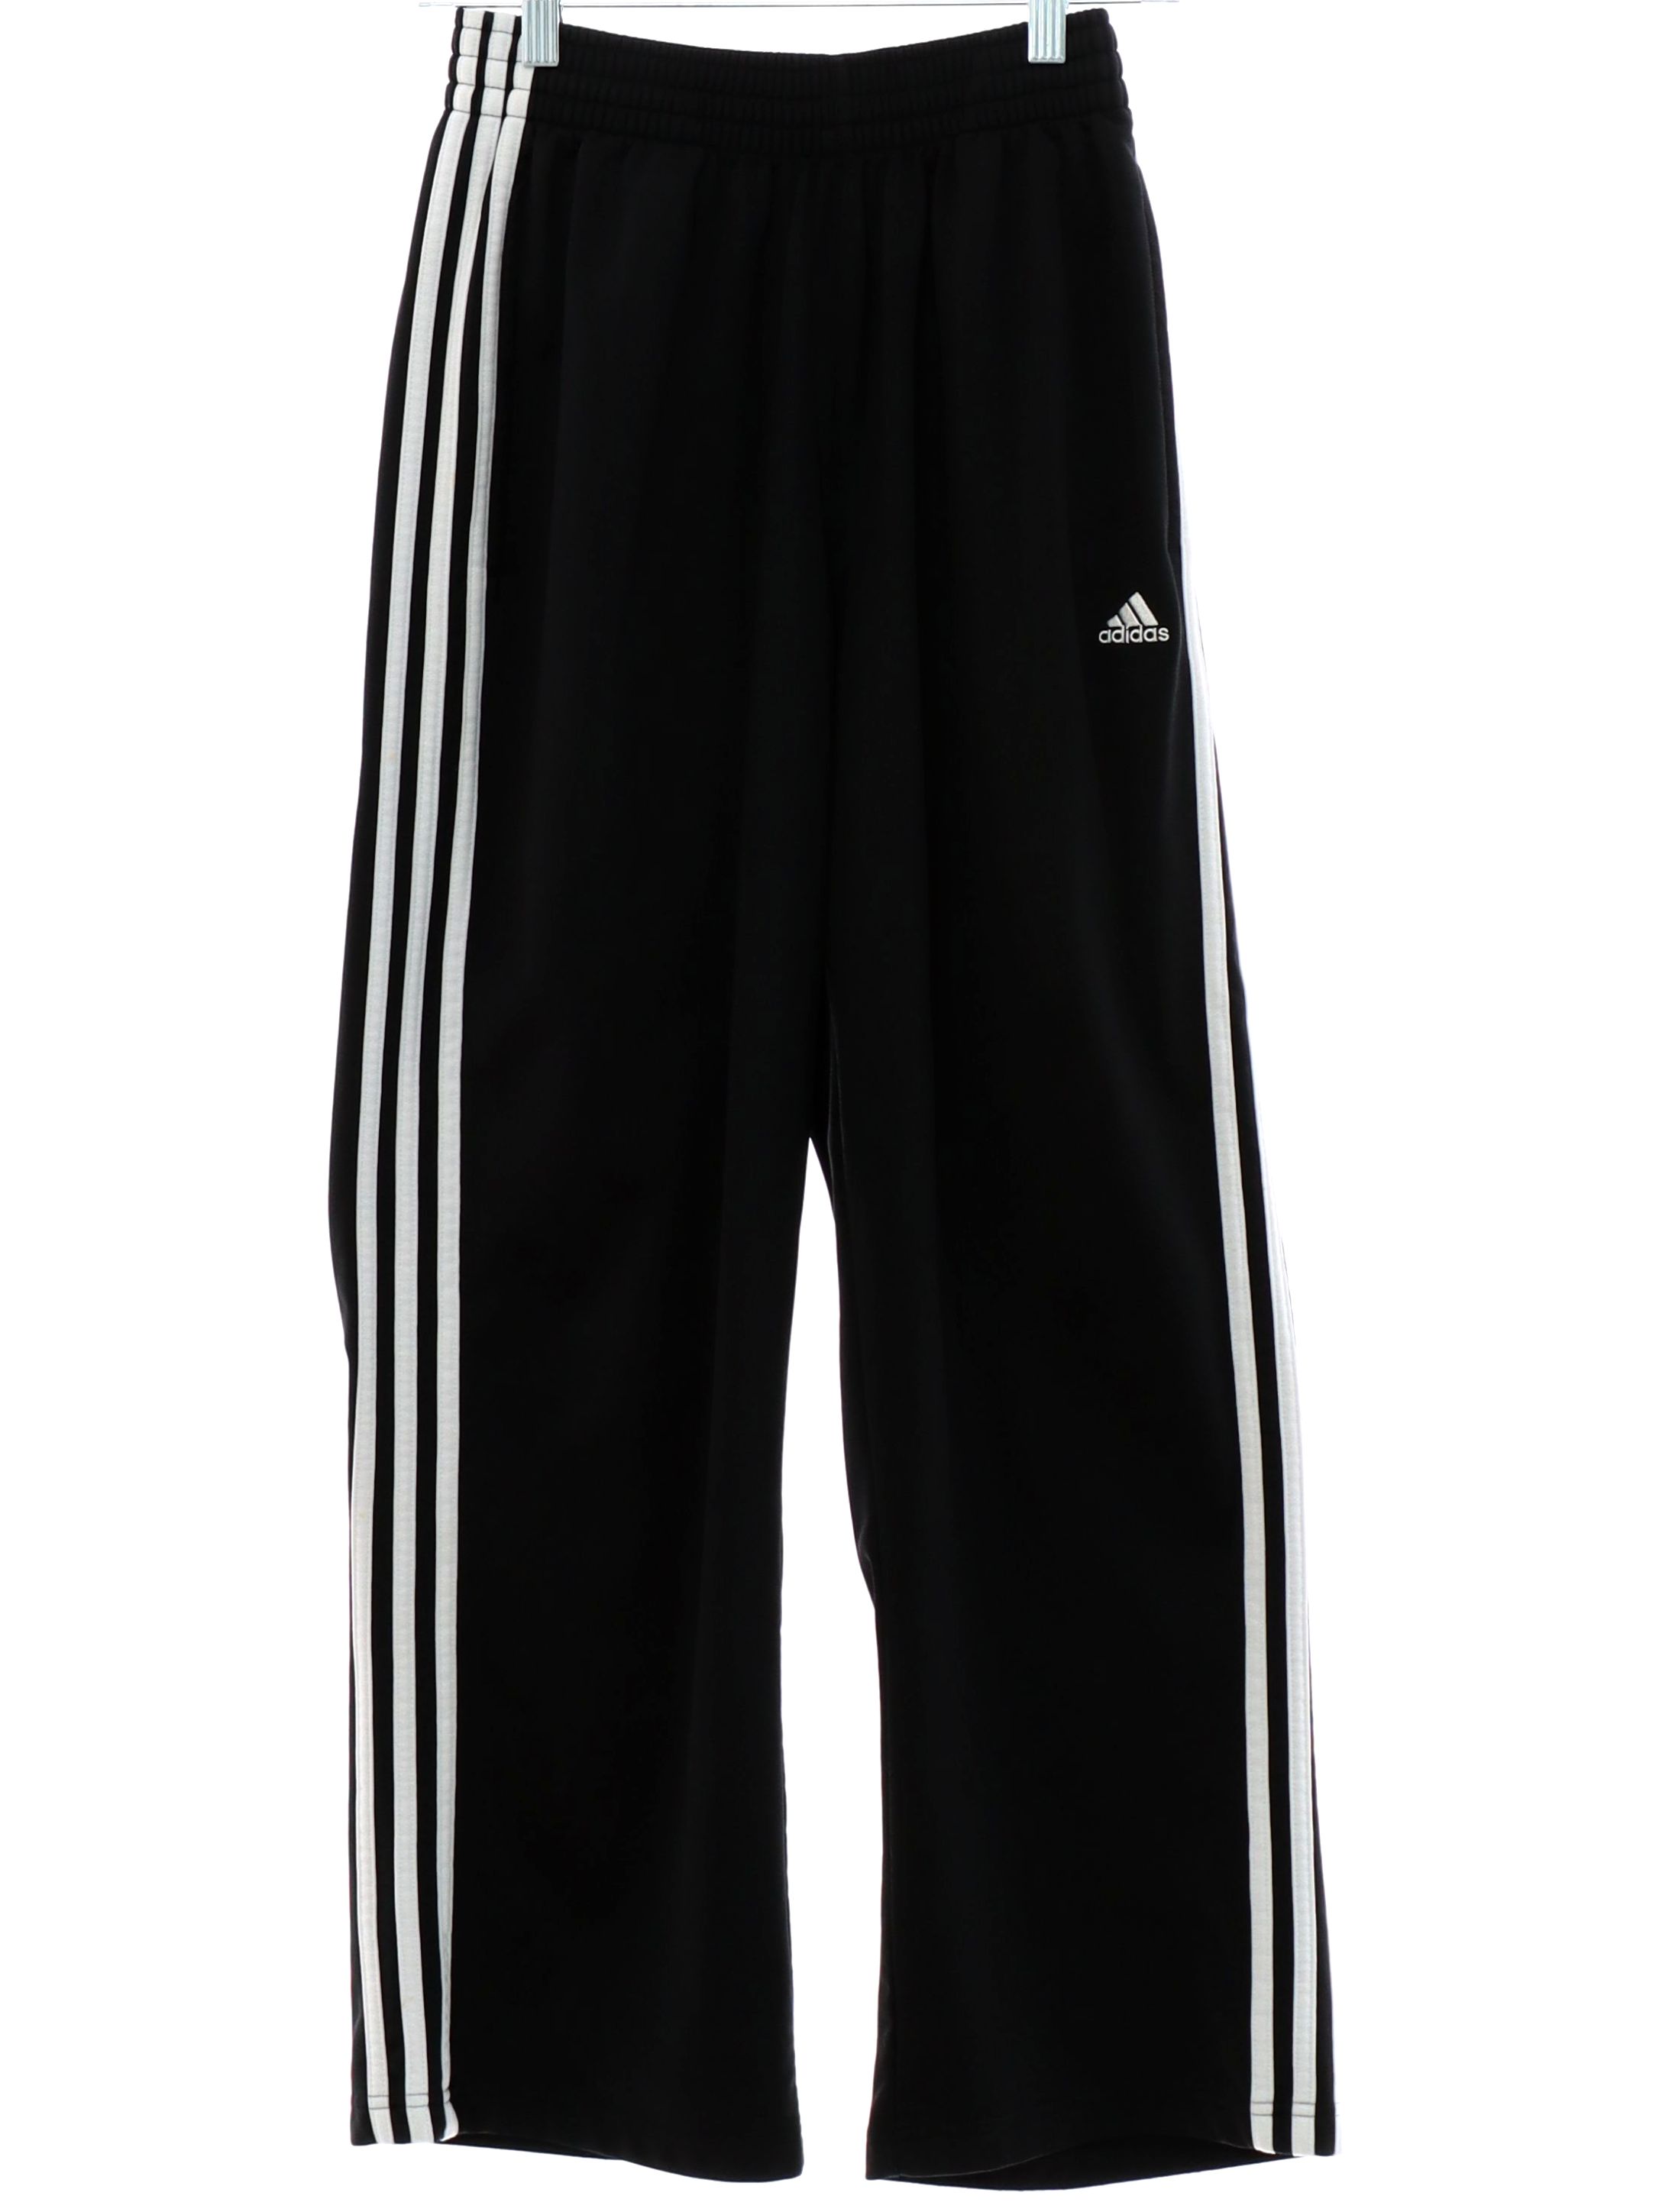 Pants: 90s -Adidas- Unisex black lightweight polyester flat front track  pants with cuffless hem, vertical seam inset side entry front pockets, no  rear pockets, elastic waistline with inside drawstring, no belt loops.